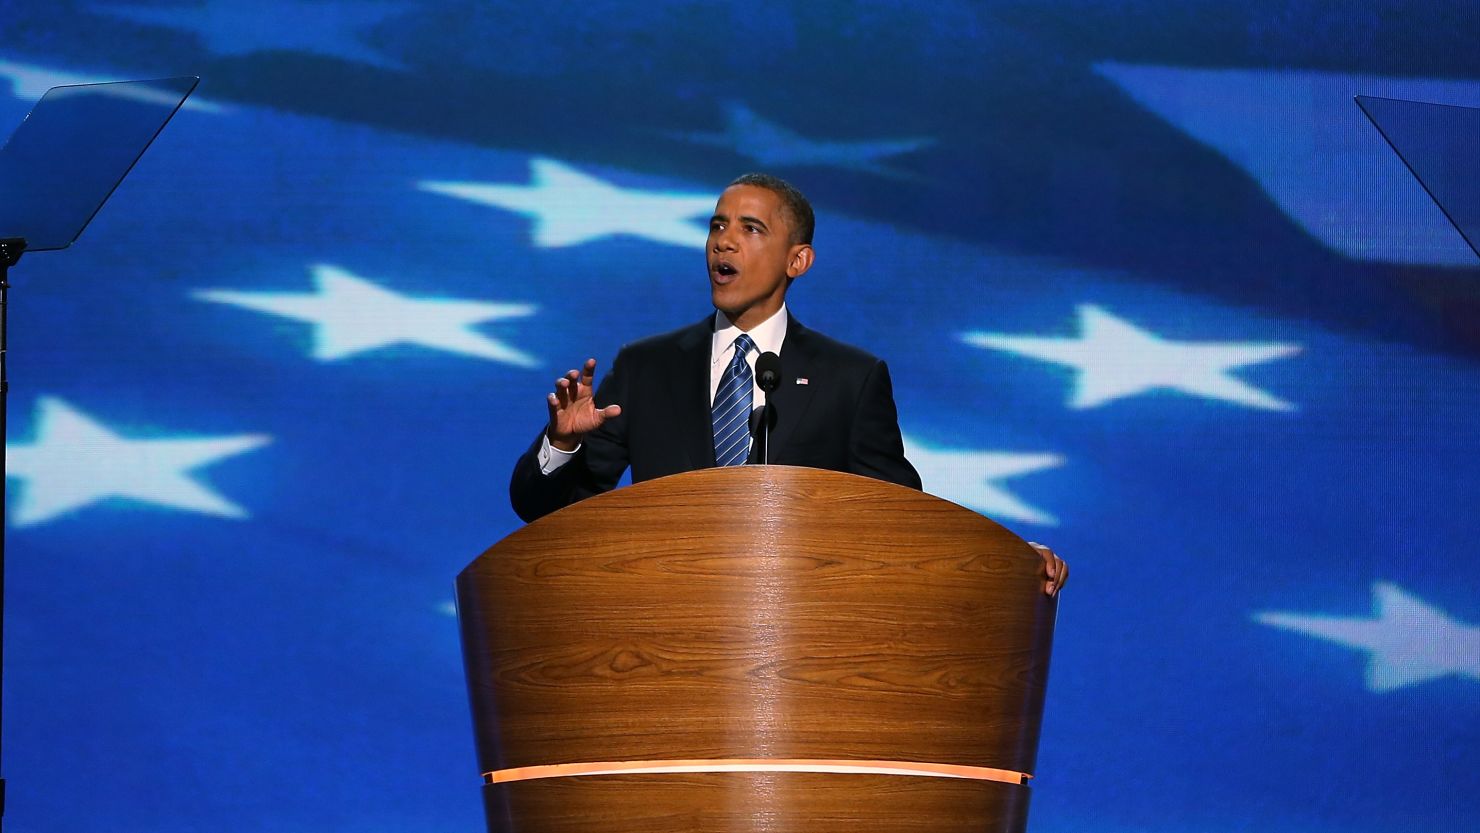 President Obama was tempered and more cautious in his speech at the Democratic National Convention, says David Gergen.